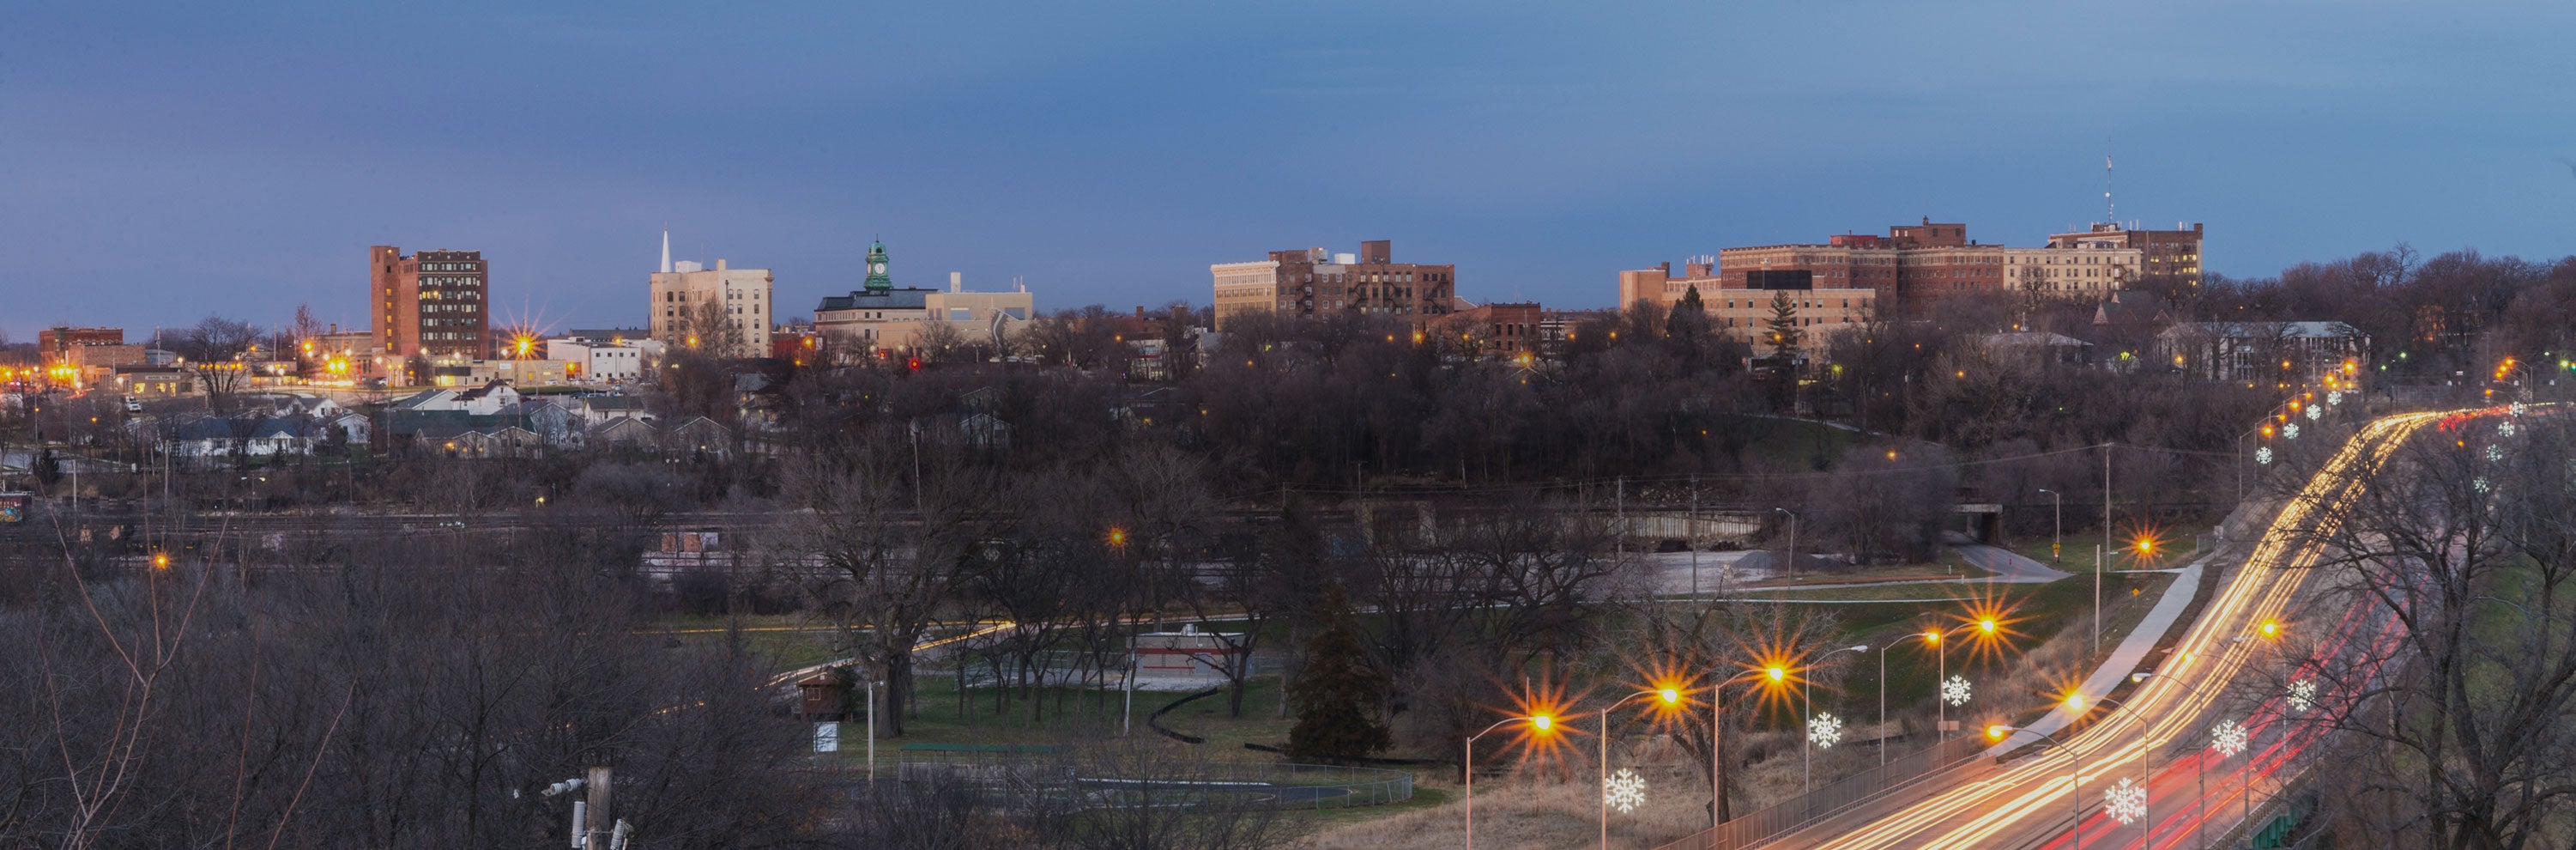 Skyline view of Fort Dodge